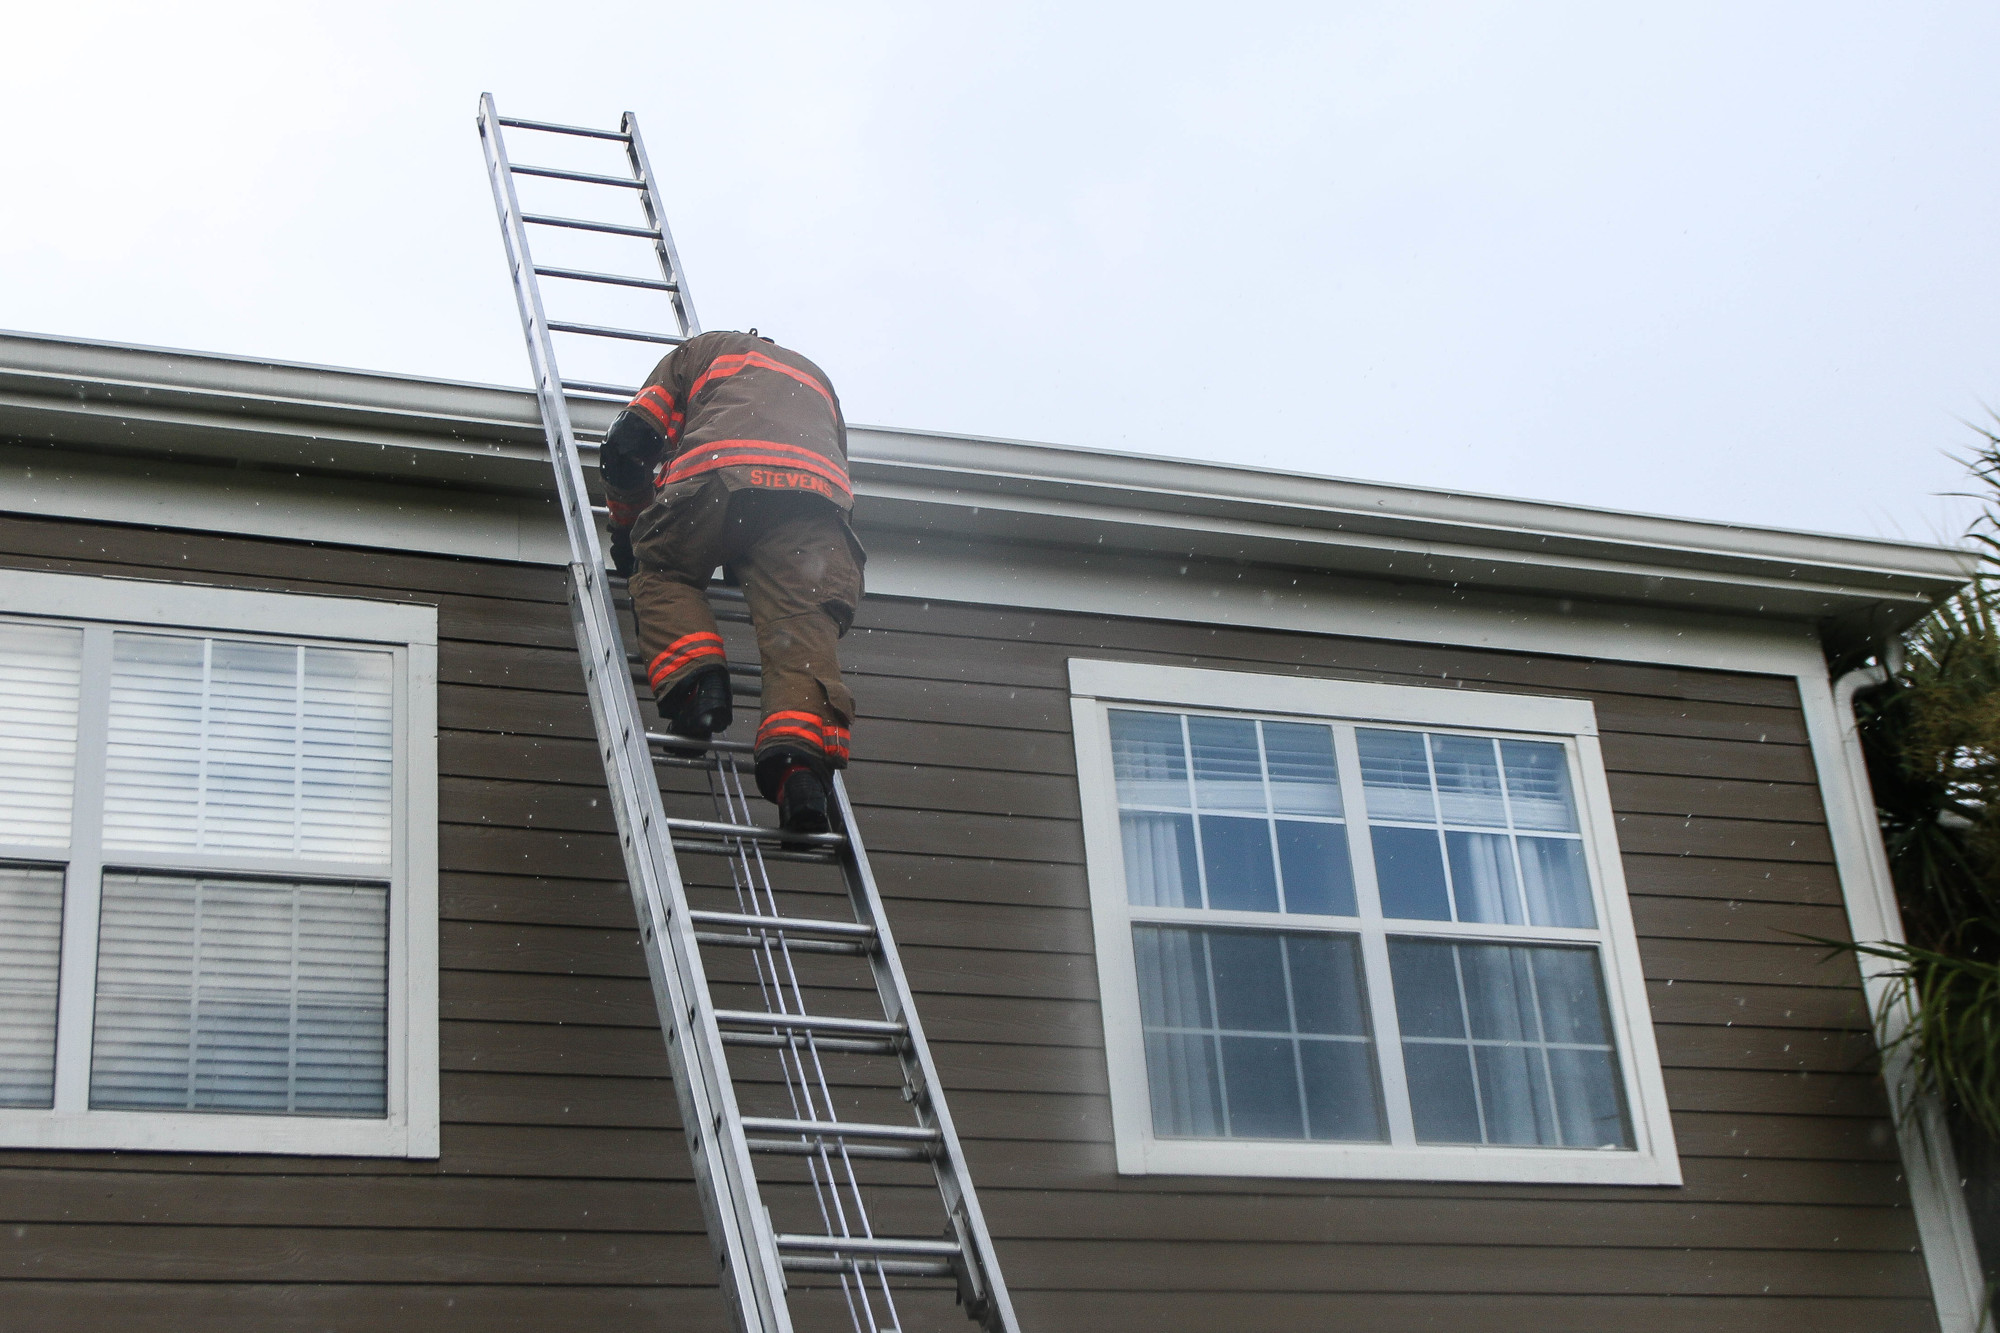 Matt Stevens, of Ladder 25, climbs down a ladder after searching the roof of building 10 for further damages as the rain continues. Photo by Paige Wilson